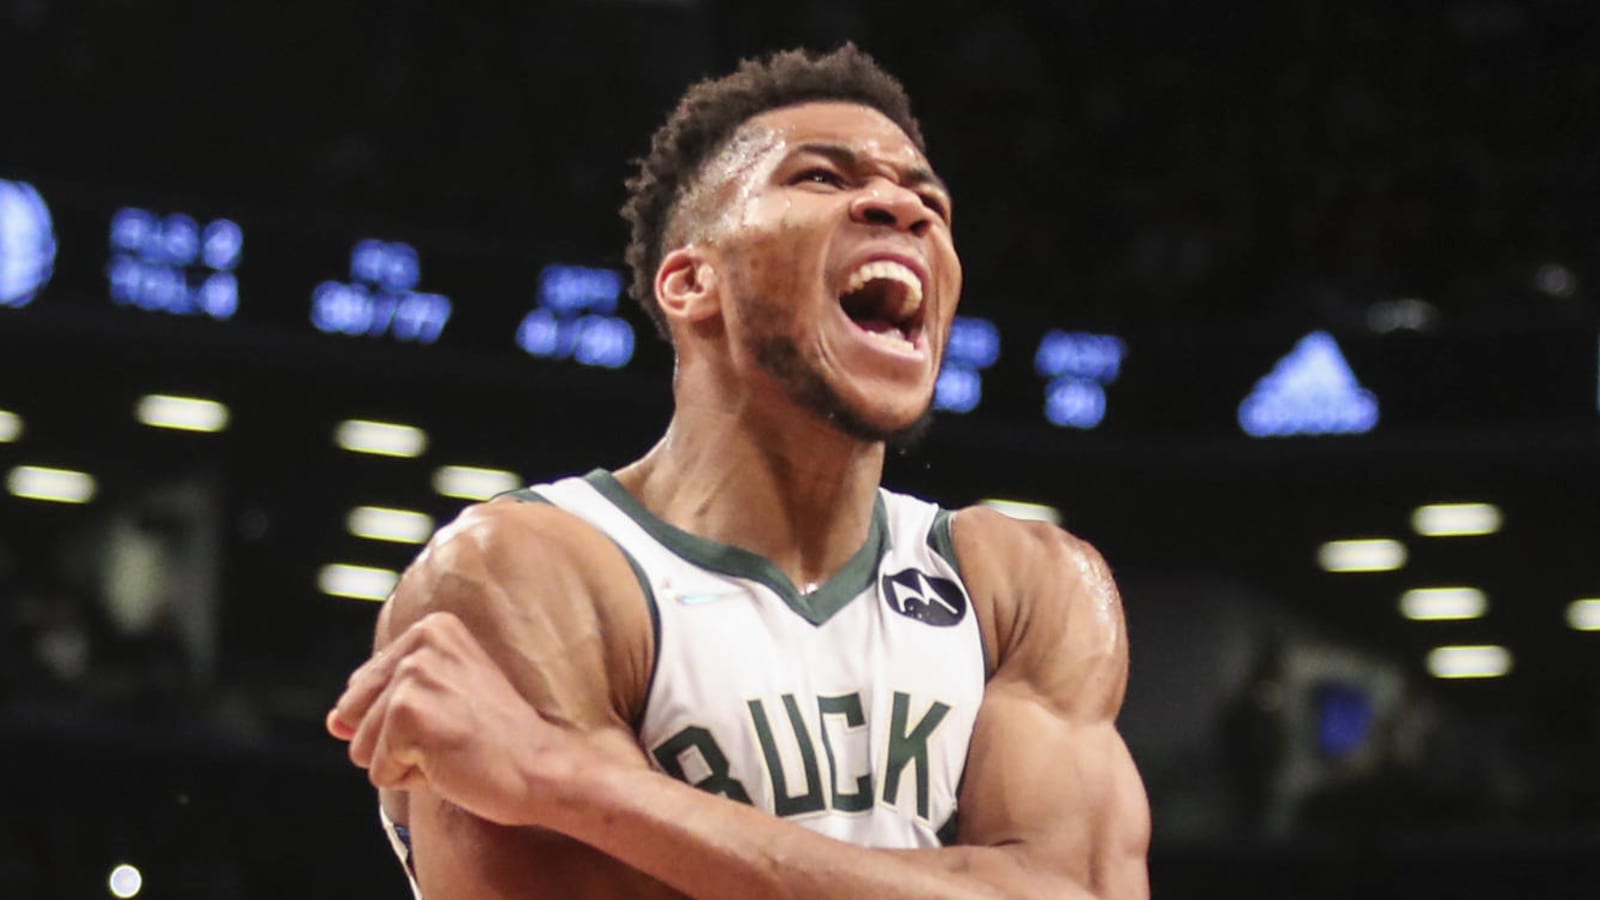 Giannis Antetokounmpo names best player, and it's not LeBron James